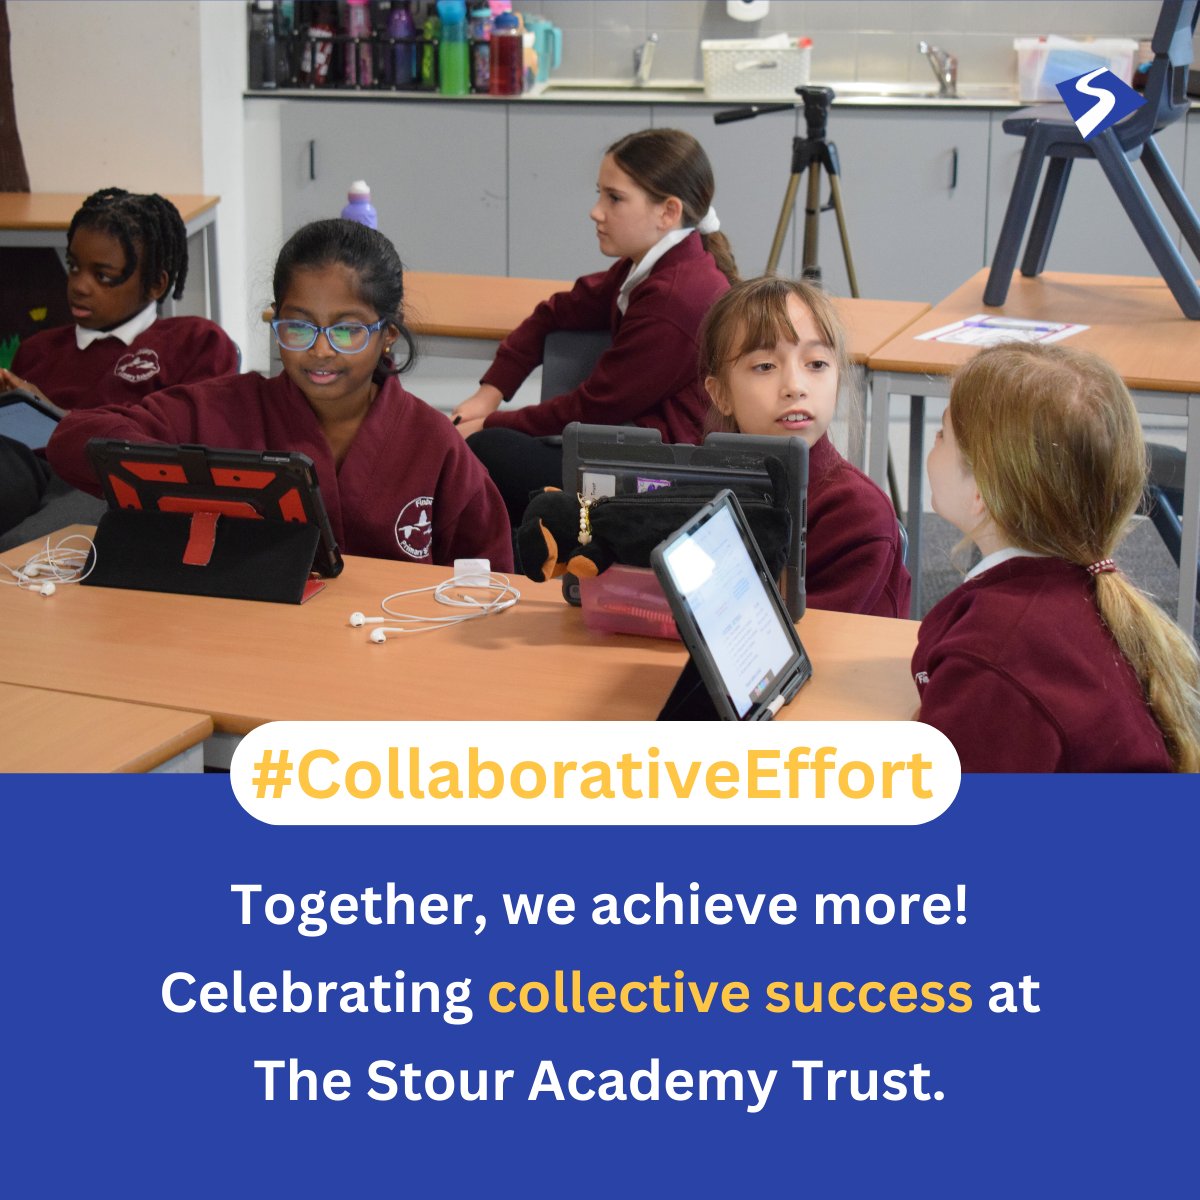 Together, we achieve more! Celebrating collective success at The Stour Academy Trust. #CollaborativeEffort